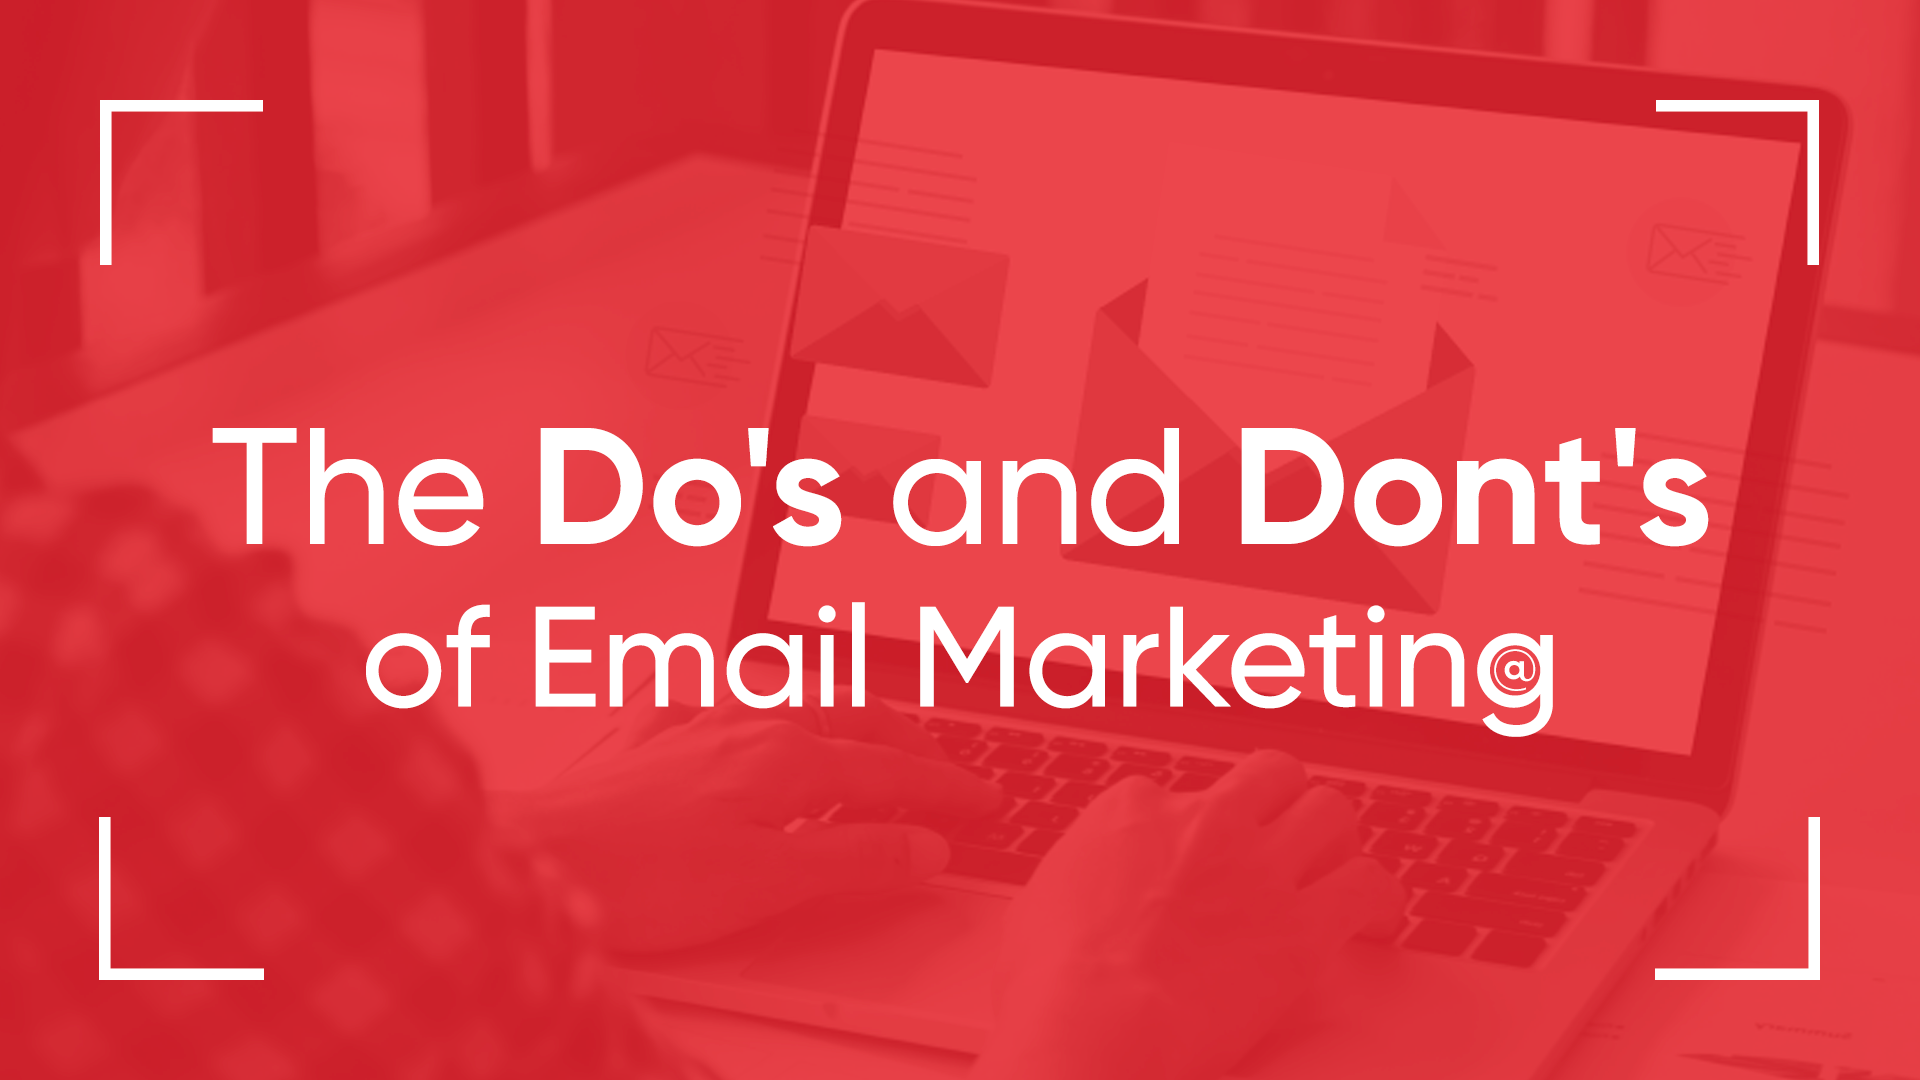 email marketing, email marketing tips, email marketing strategies, emails, email marketing 2021, marketing 2021, small business tips, small business 2021, grow your small business, email marketing dos and donts